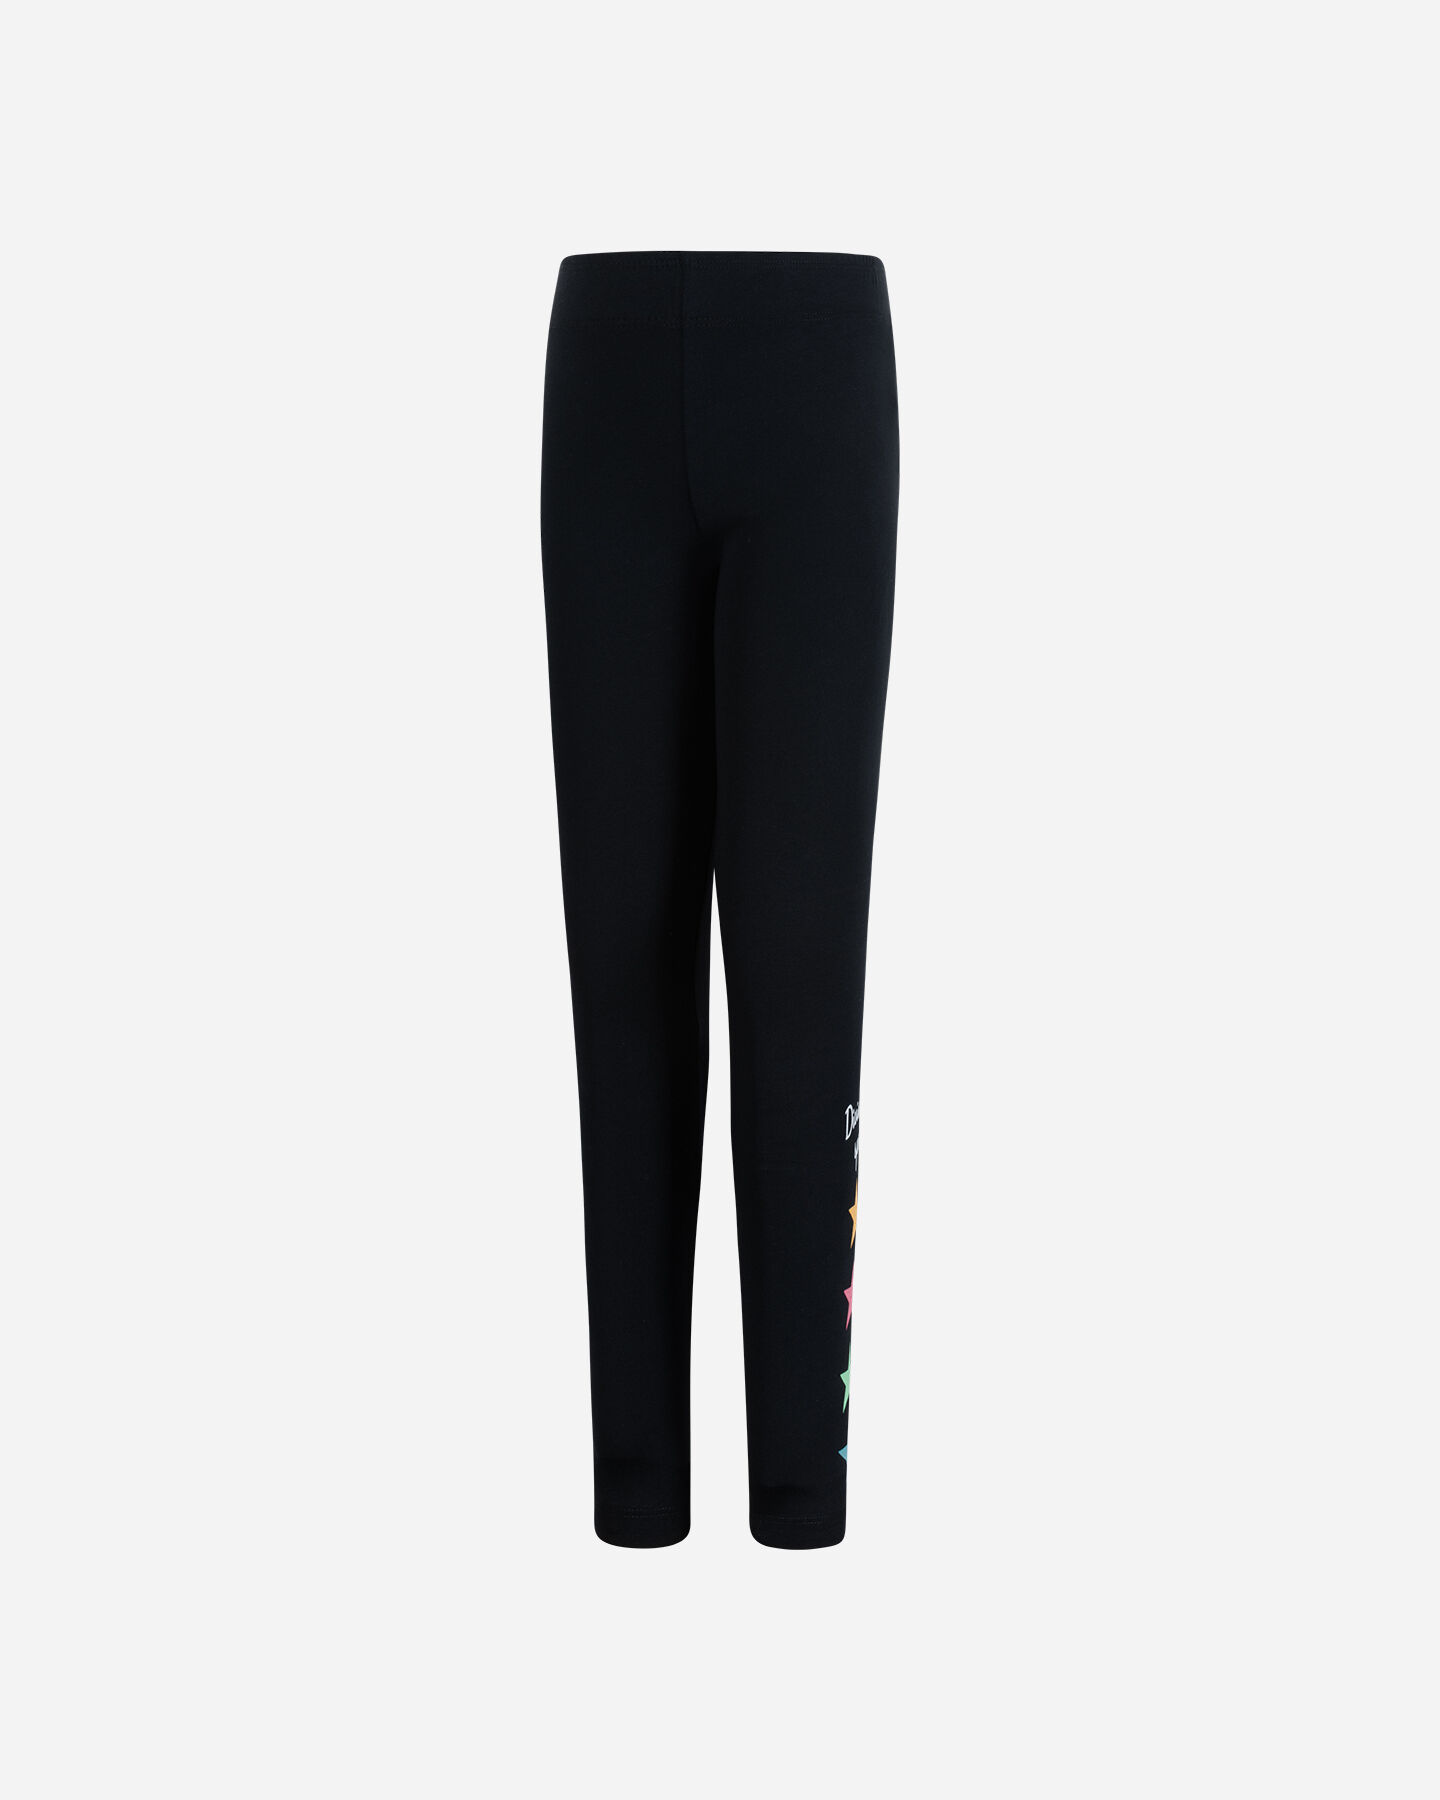  Leggings ADMIRAL BASIC SPORT JR S4119944|050|6A scatto 0